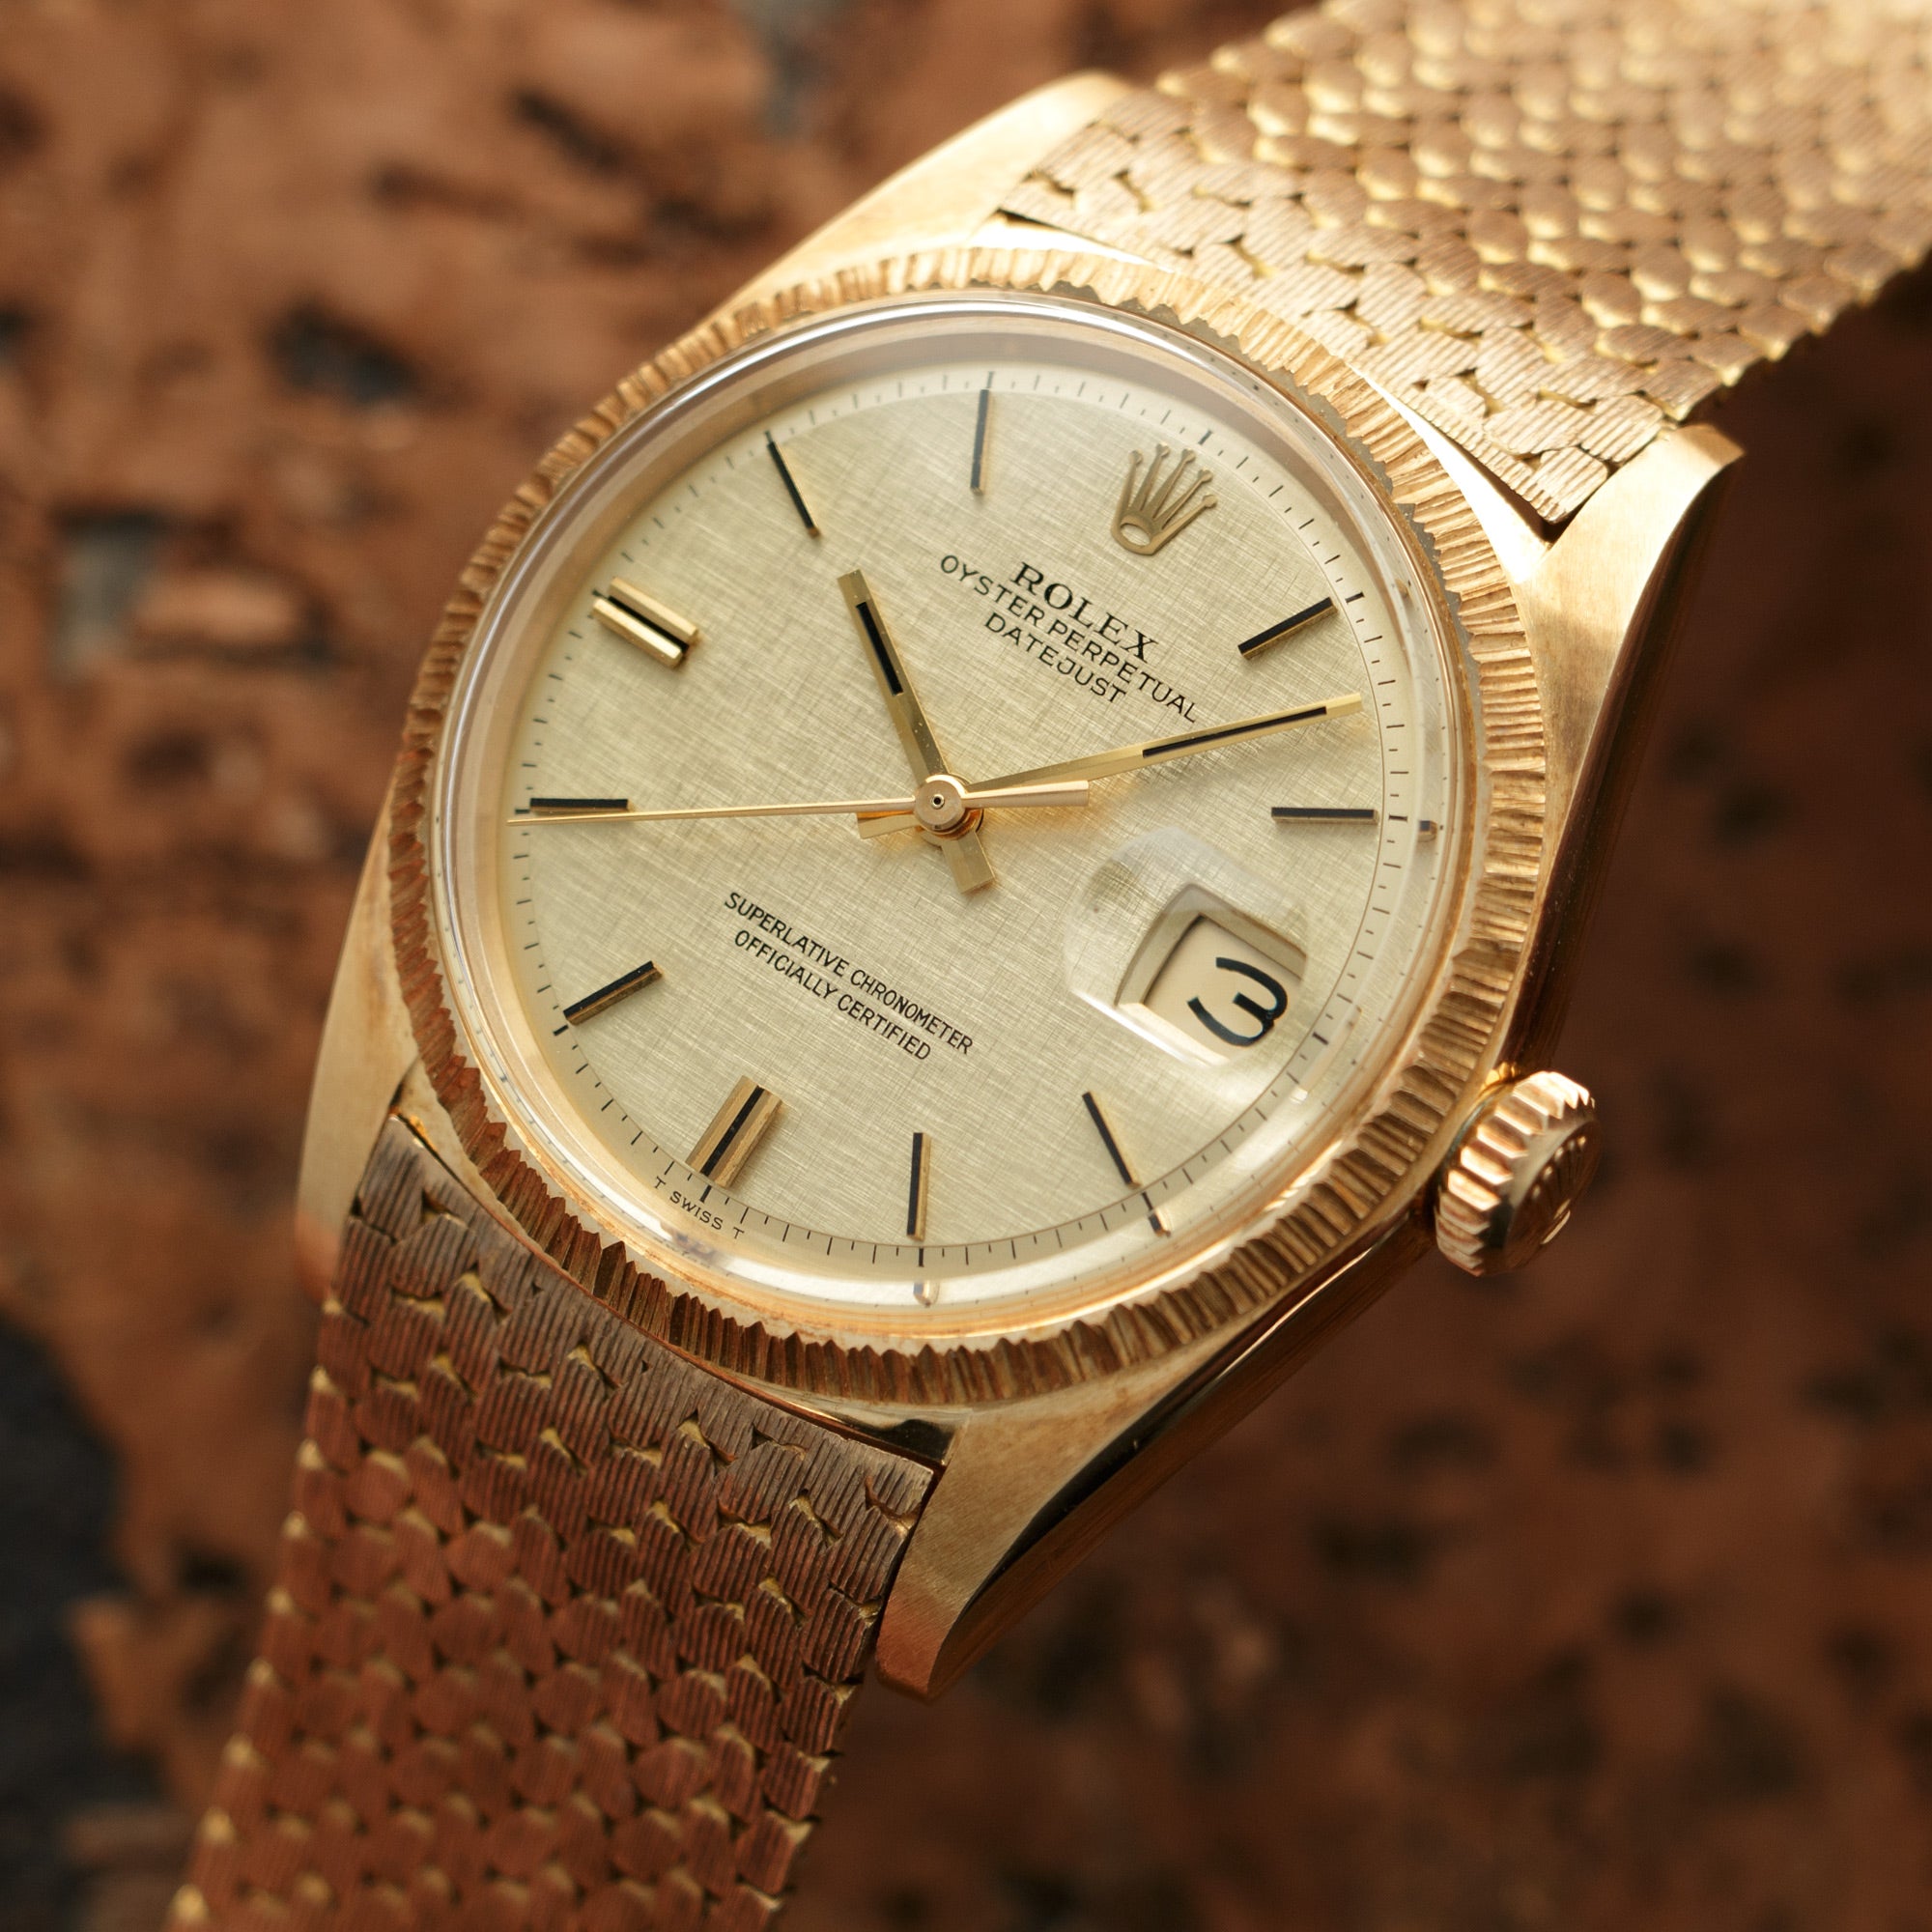 Rolex - Rolex Yellow Gold Datejust Ref. 1607 with Unusual Bracelet - The Keystone Watches